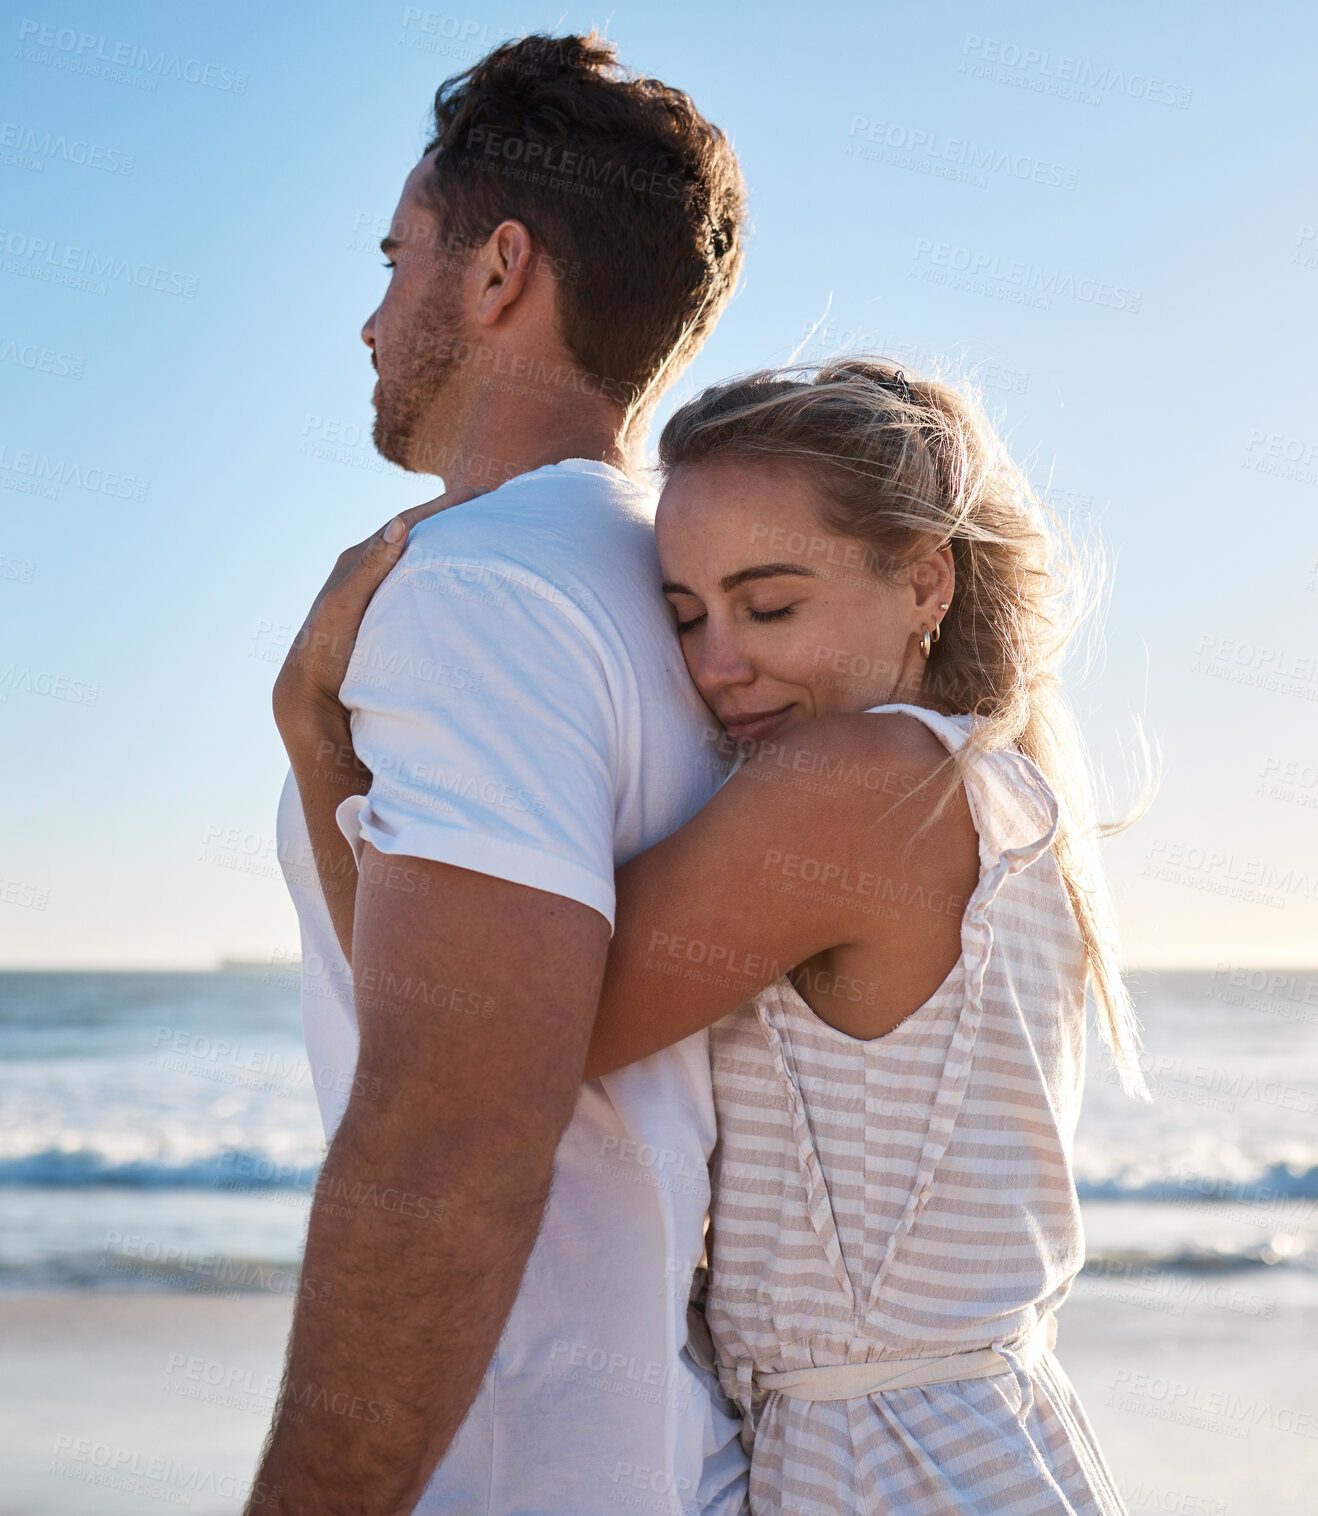 Buy stock photo Hug, love and beach with a young couple enjoying a date in nature together for romance or vacation. Summer, travel and hugging with a man and woman dating on a coast holiday by the sea or ocean